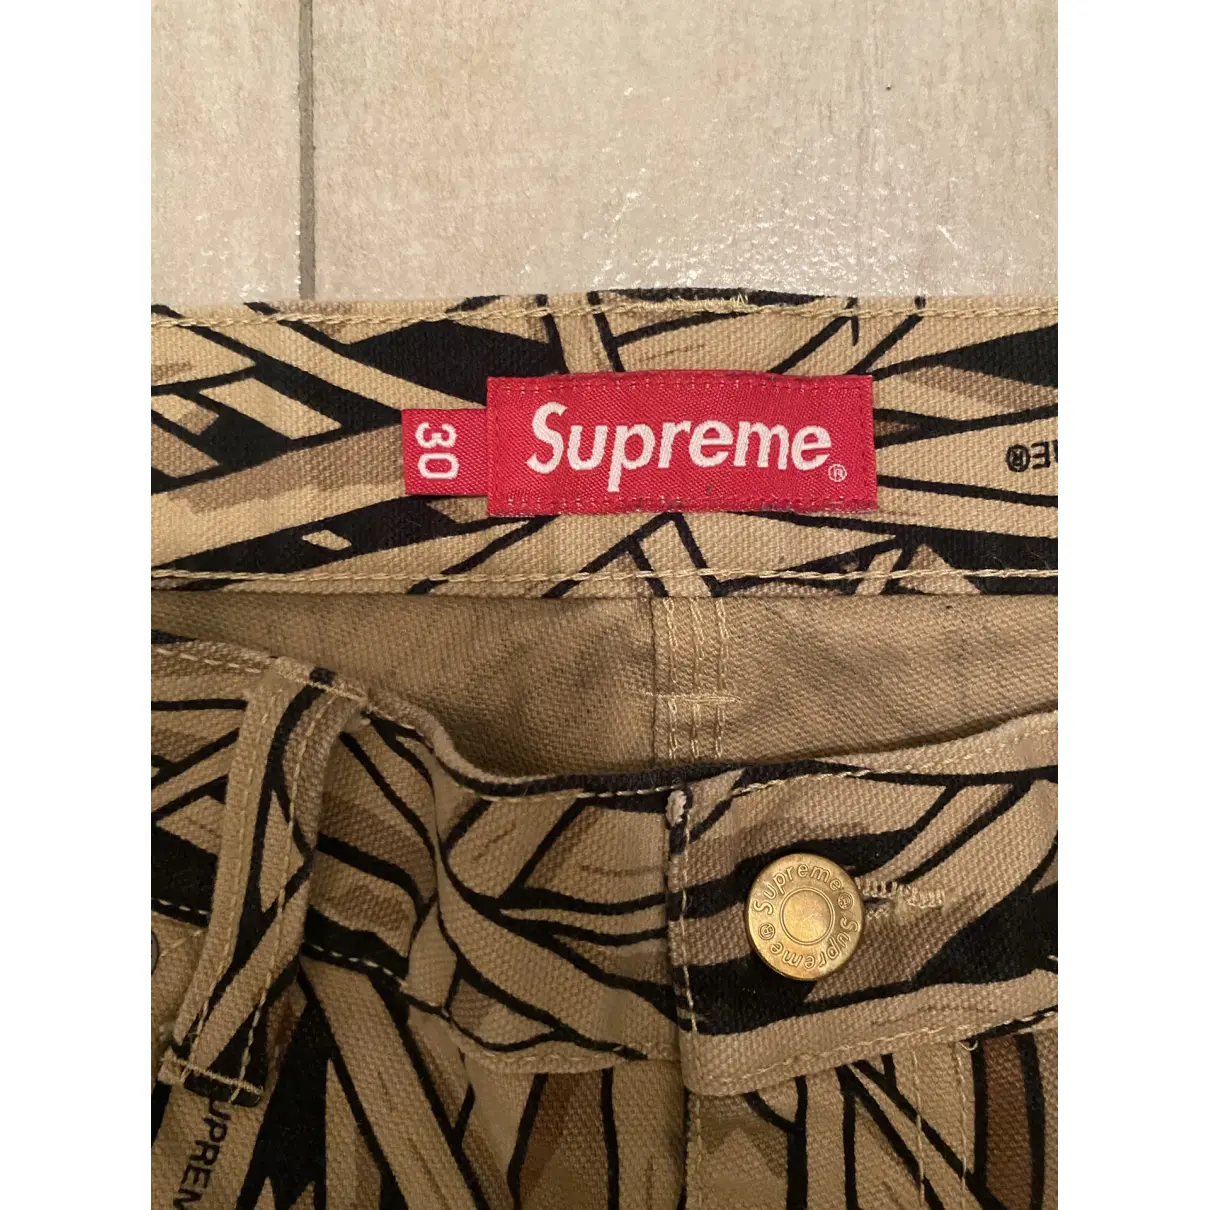 Buy Supreme Trousers online